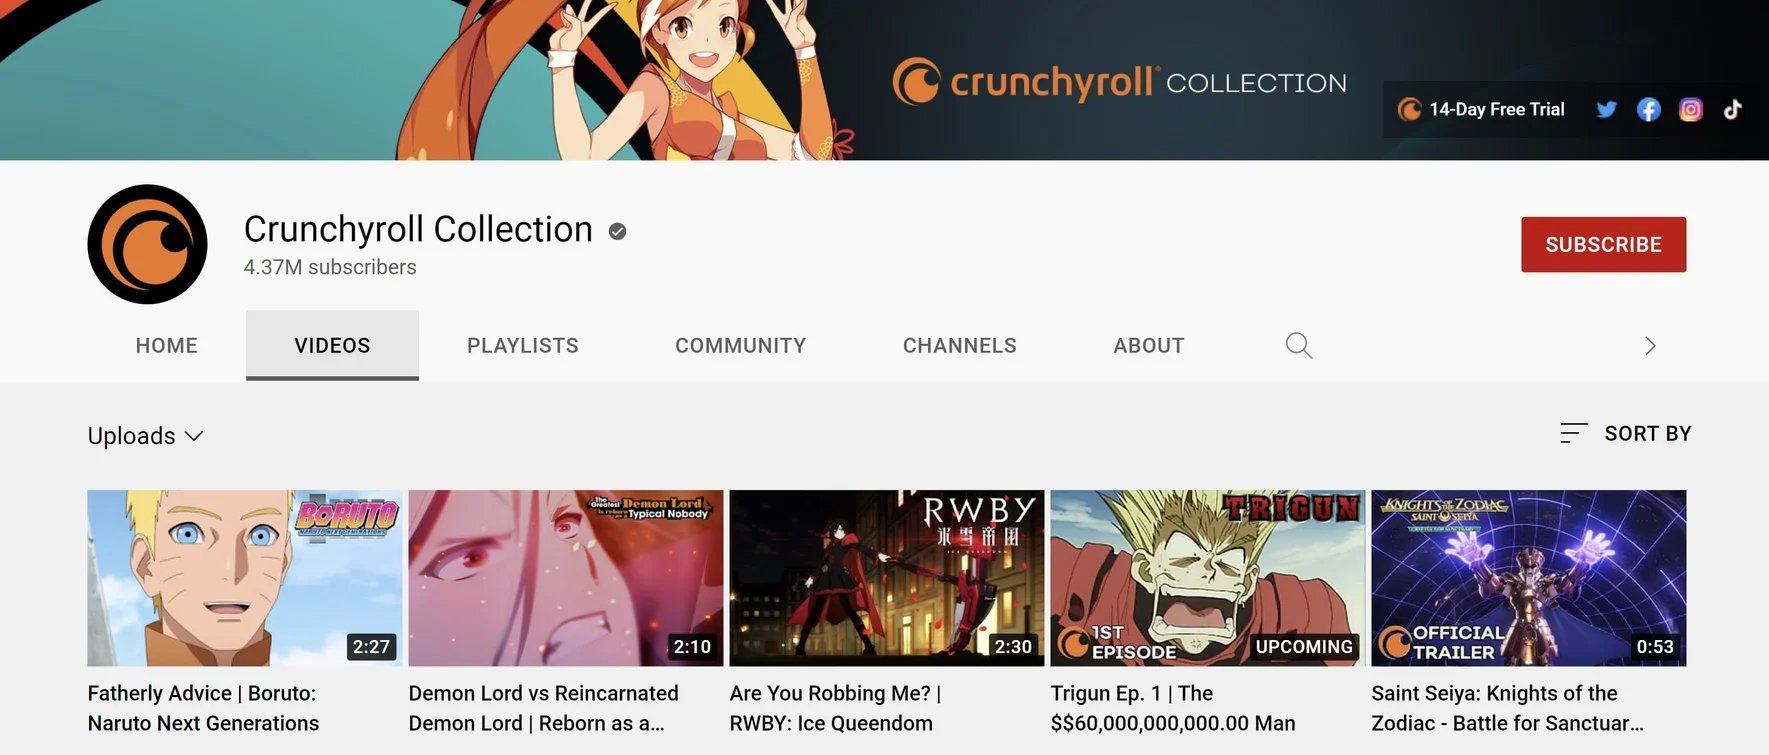 Crunchyroll is a content marketing example